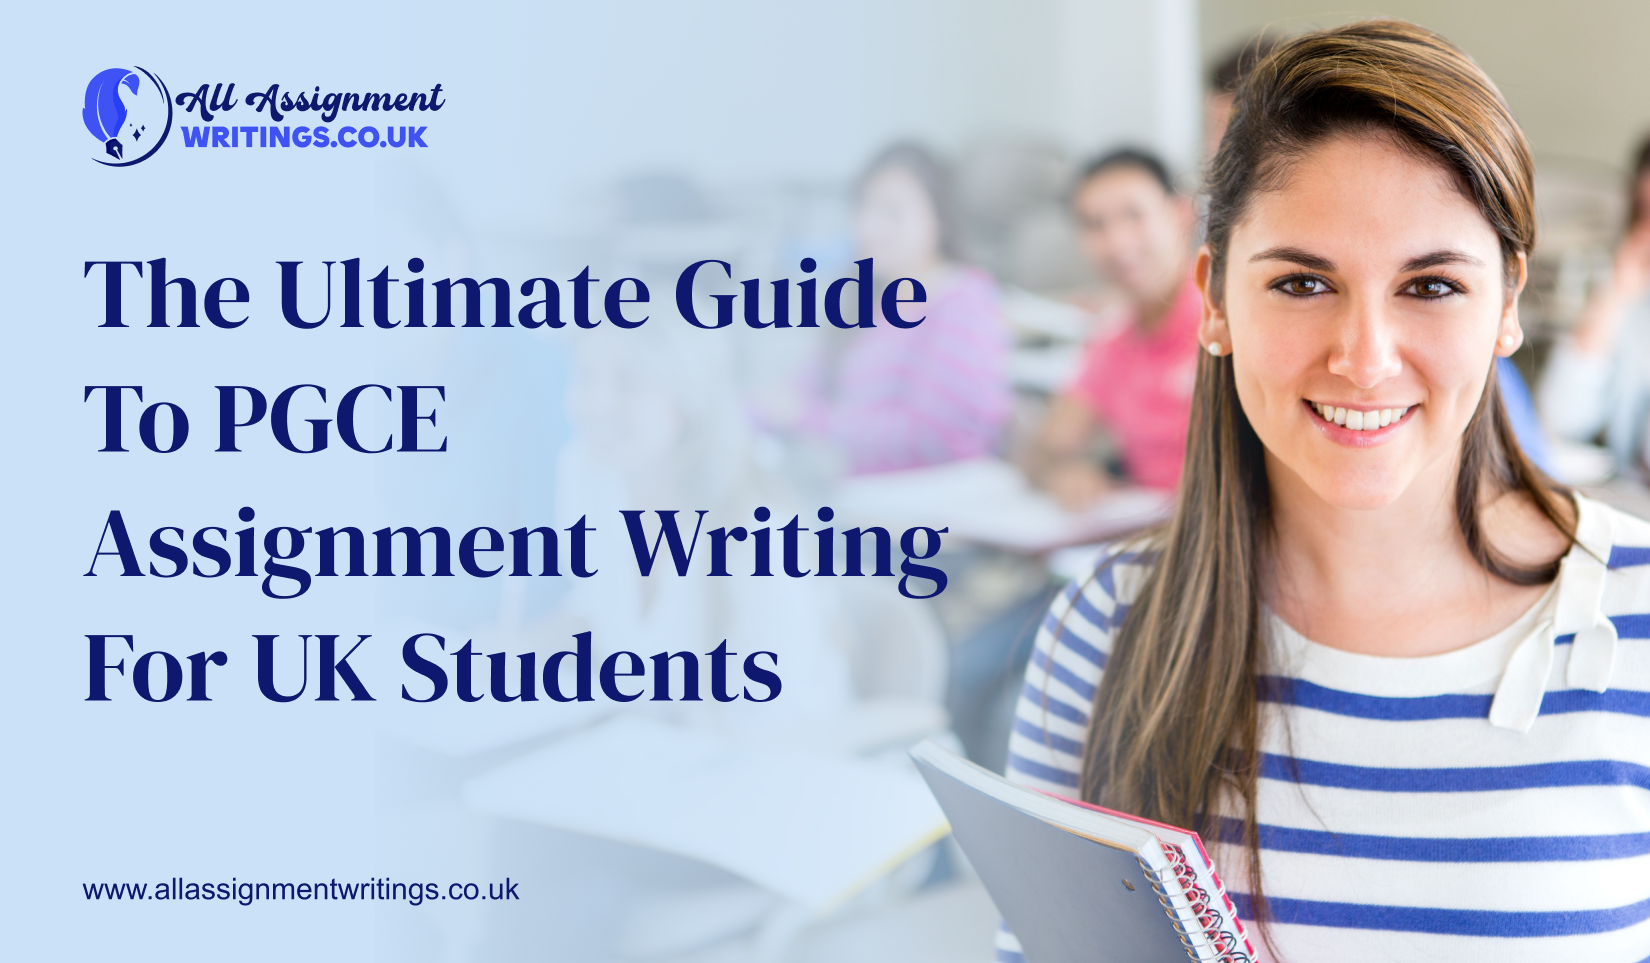 The Ultimate Guide to PGCE Assignment Writing for UK Students